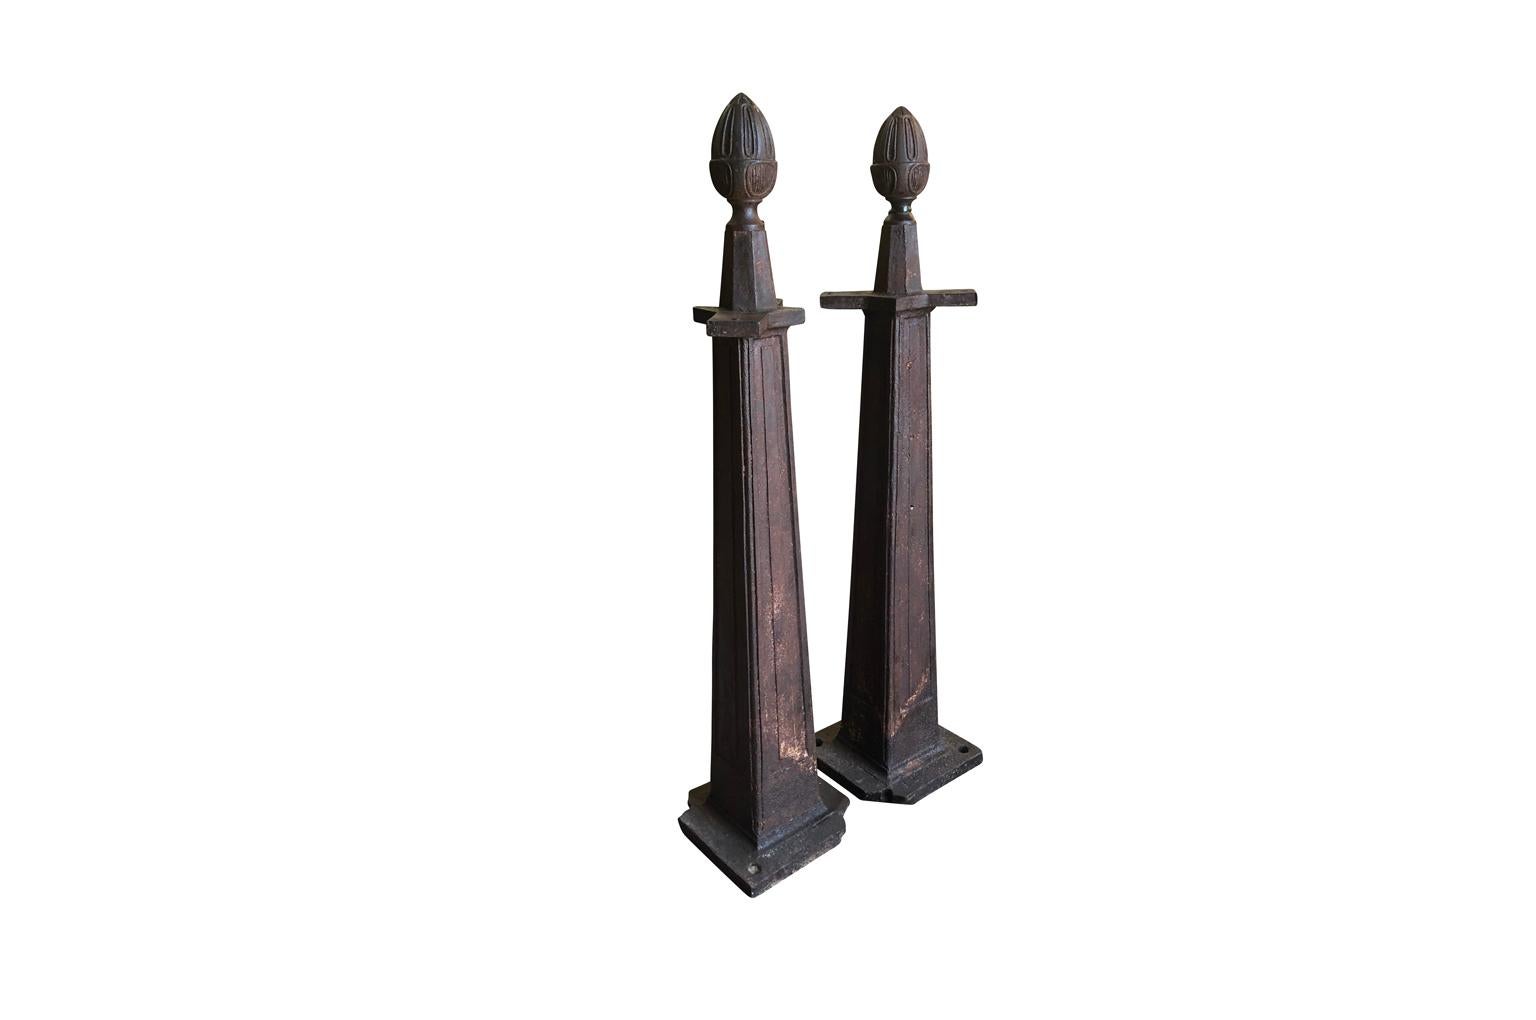 A very handsome pair of late 19th century gate supports in cast iron. Wonderful architectural elements for any interior or exterior.